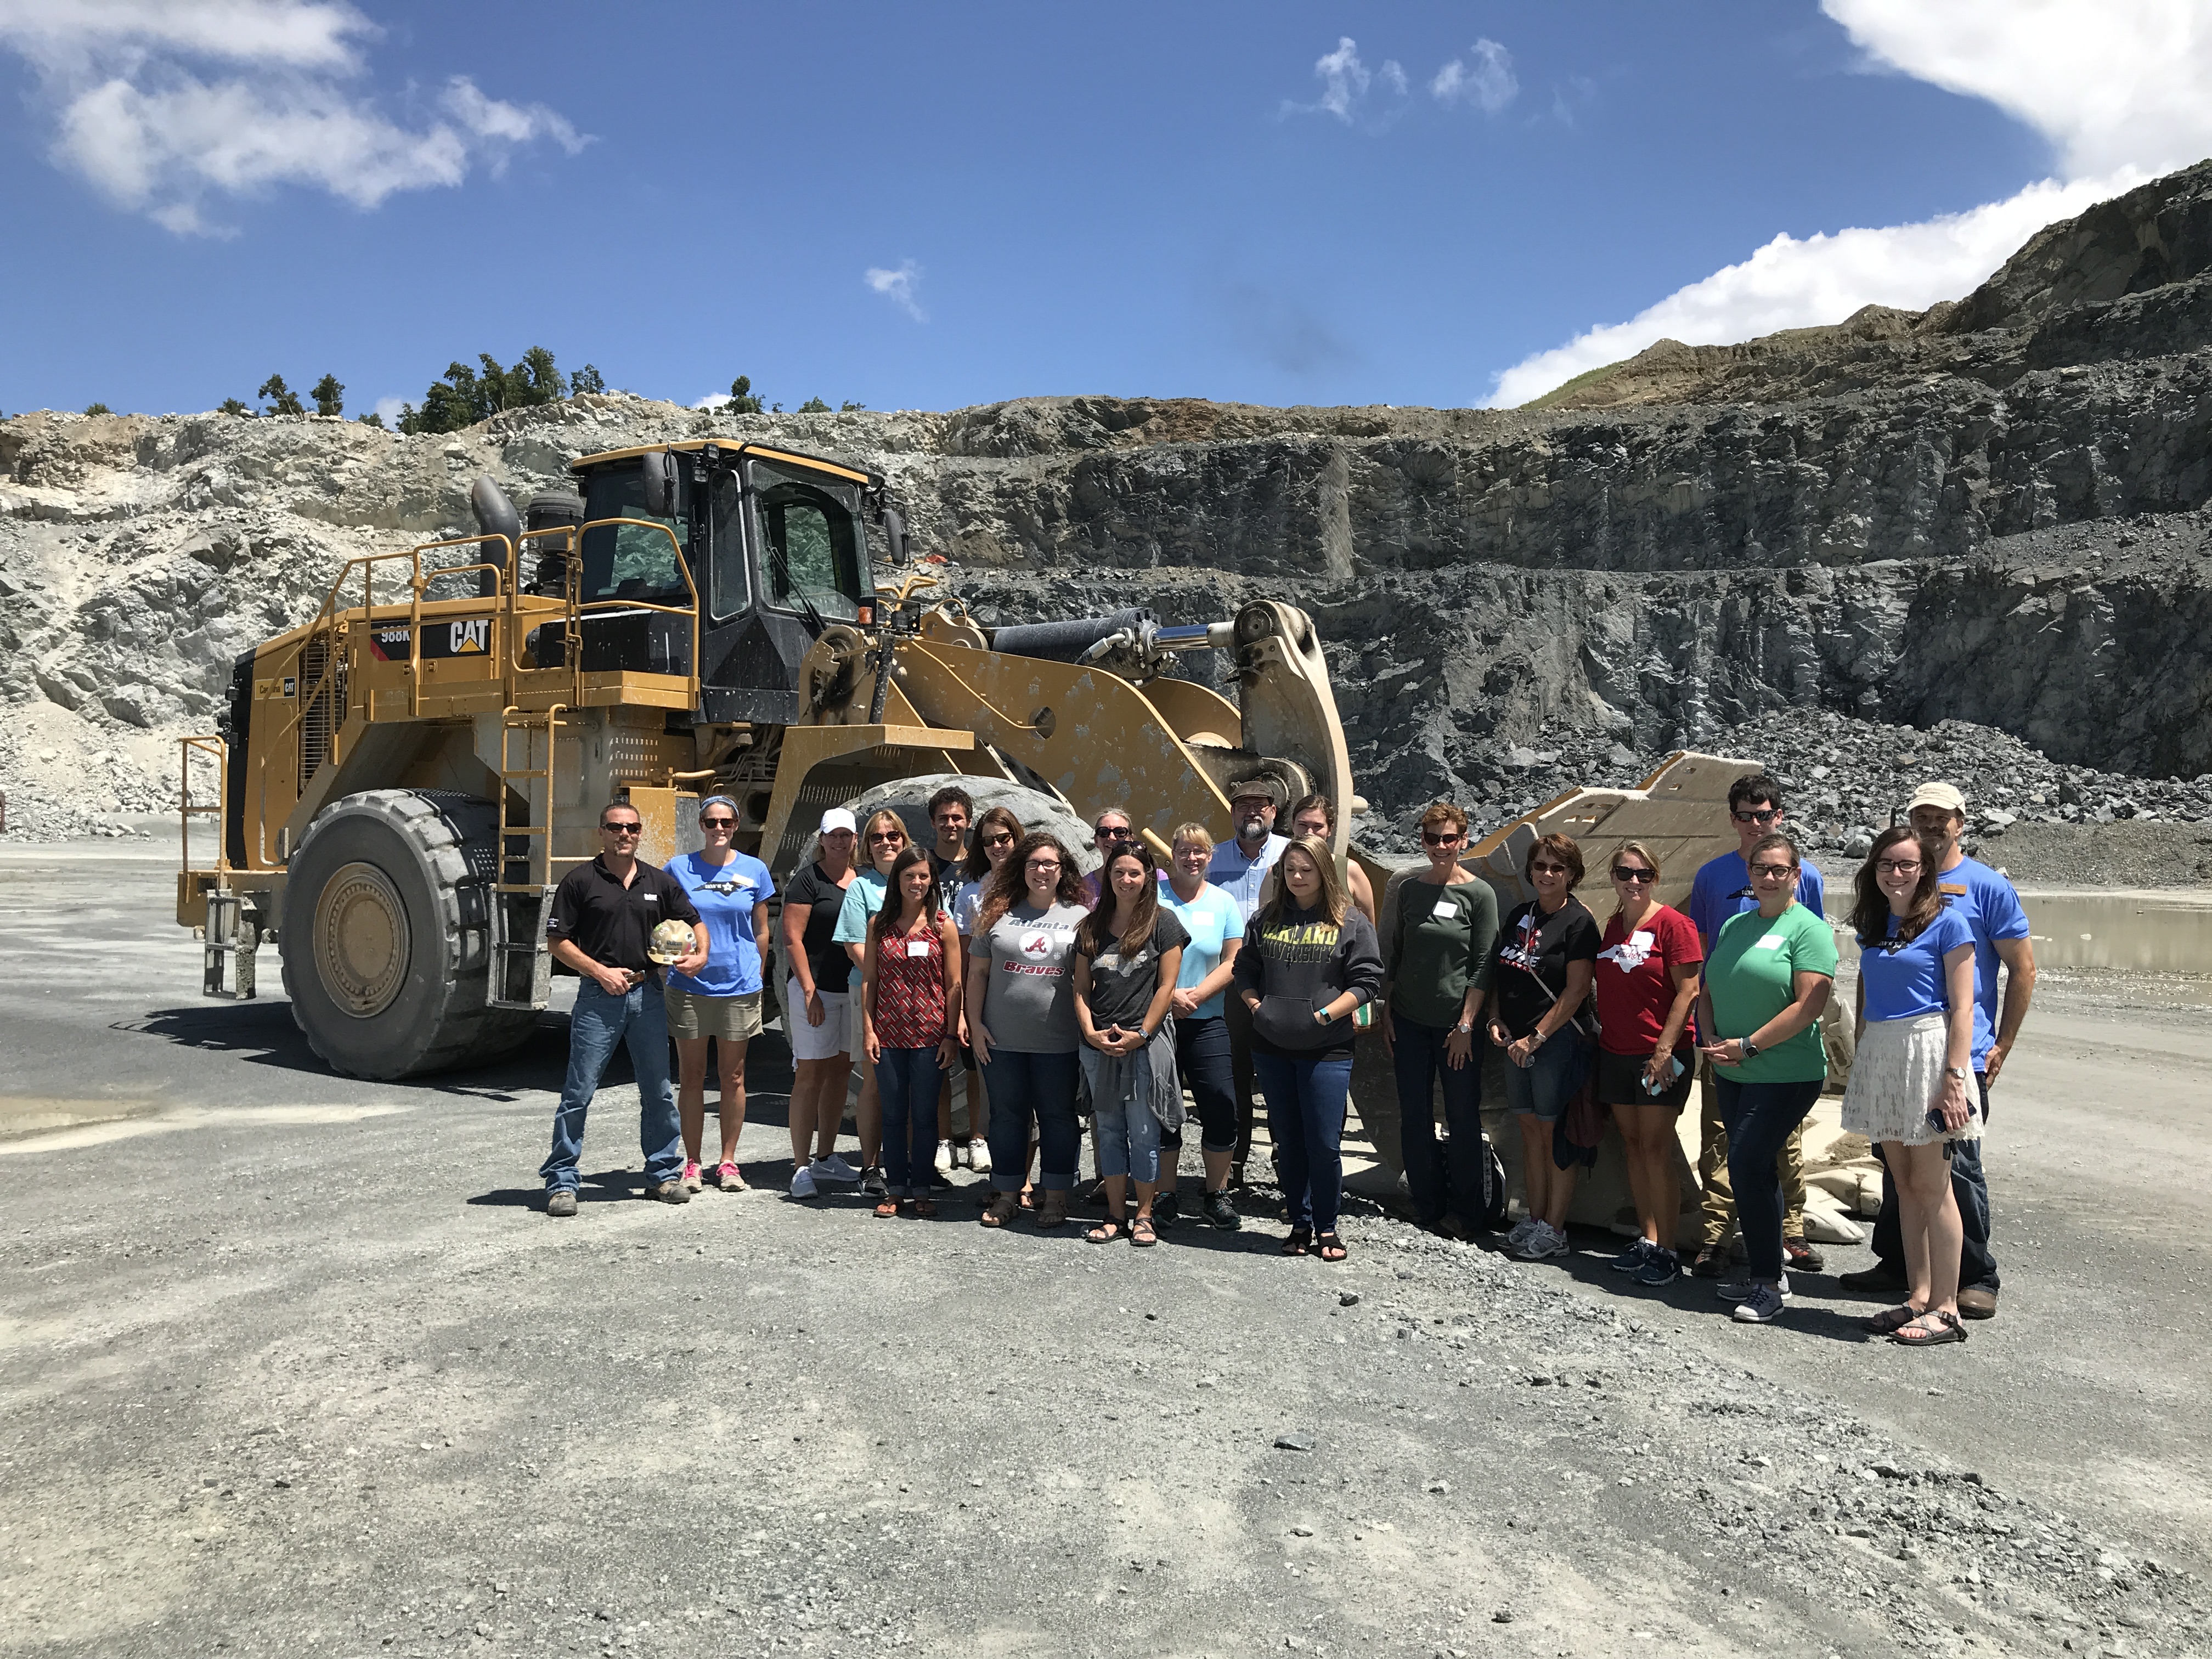 Group visit to the Vulcan Quarry